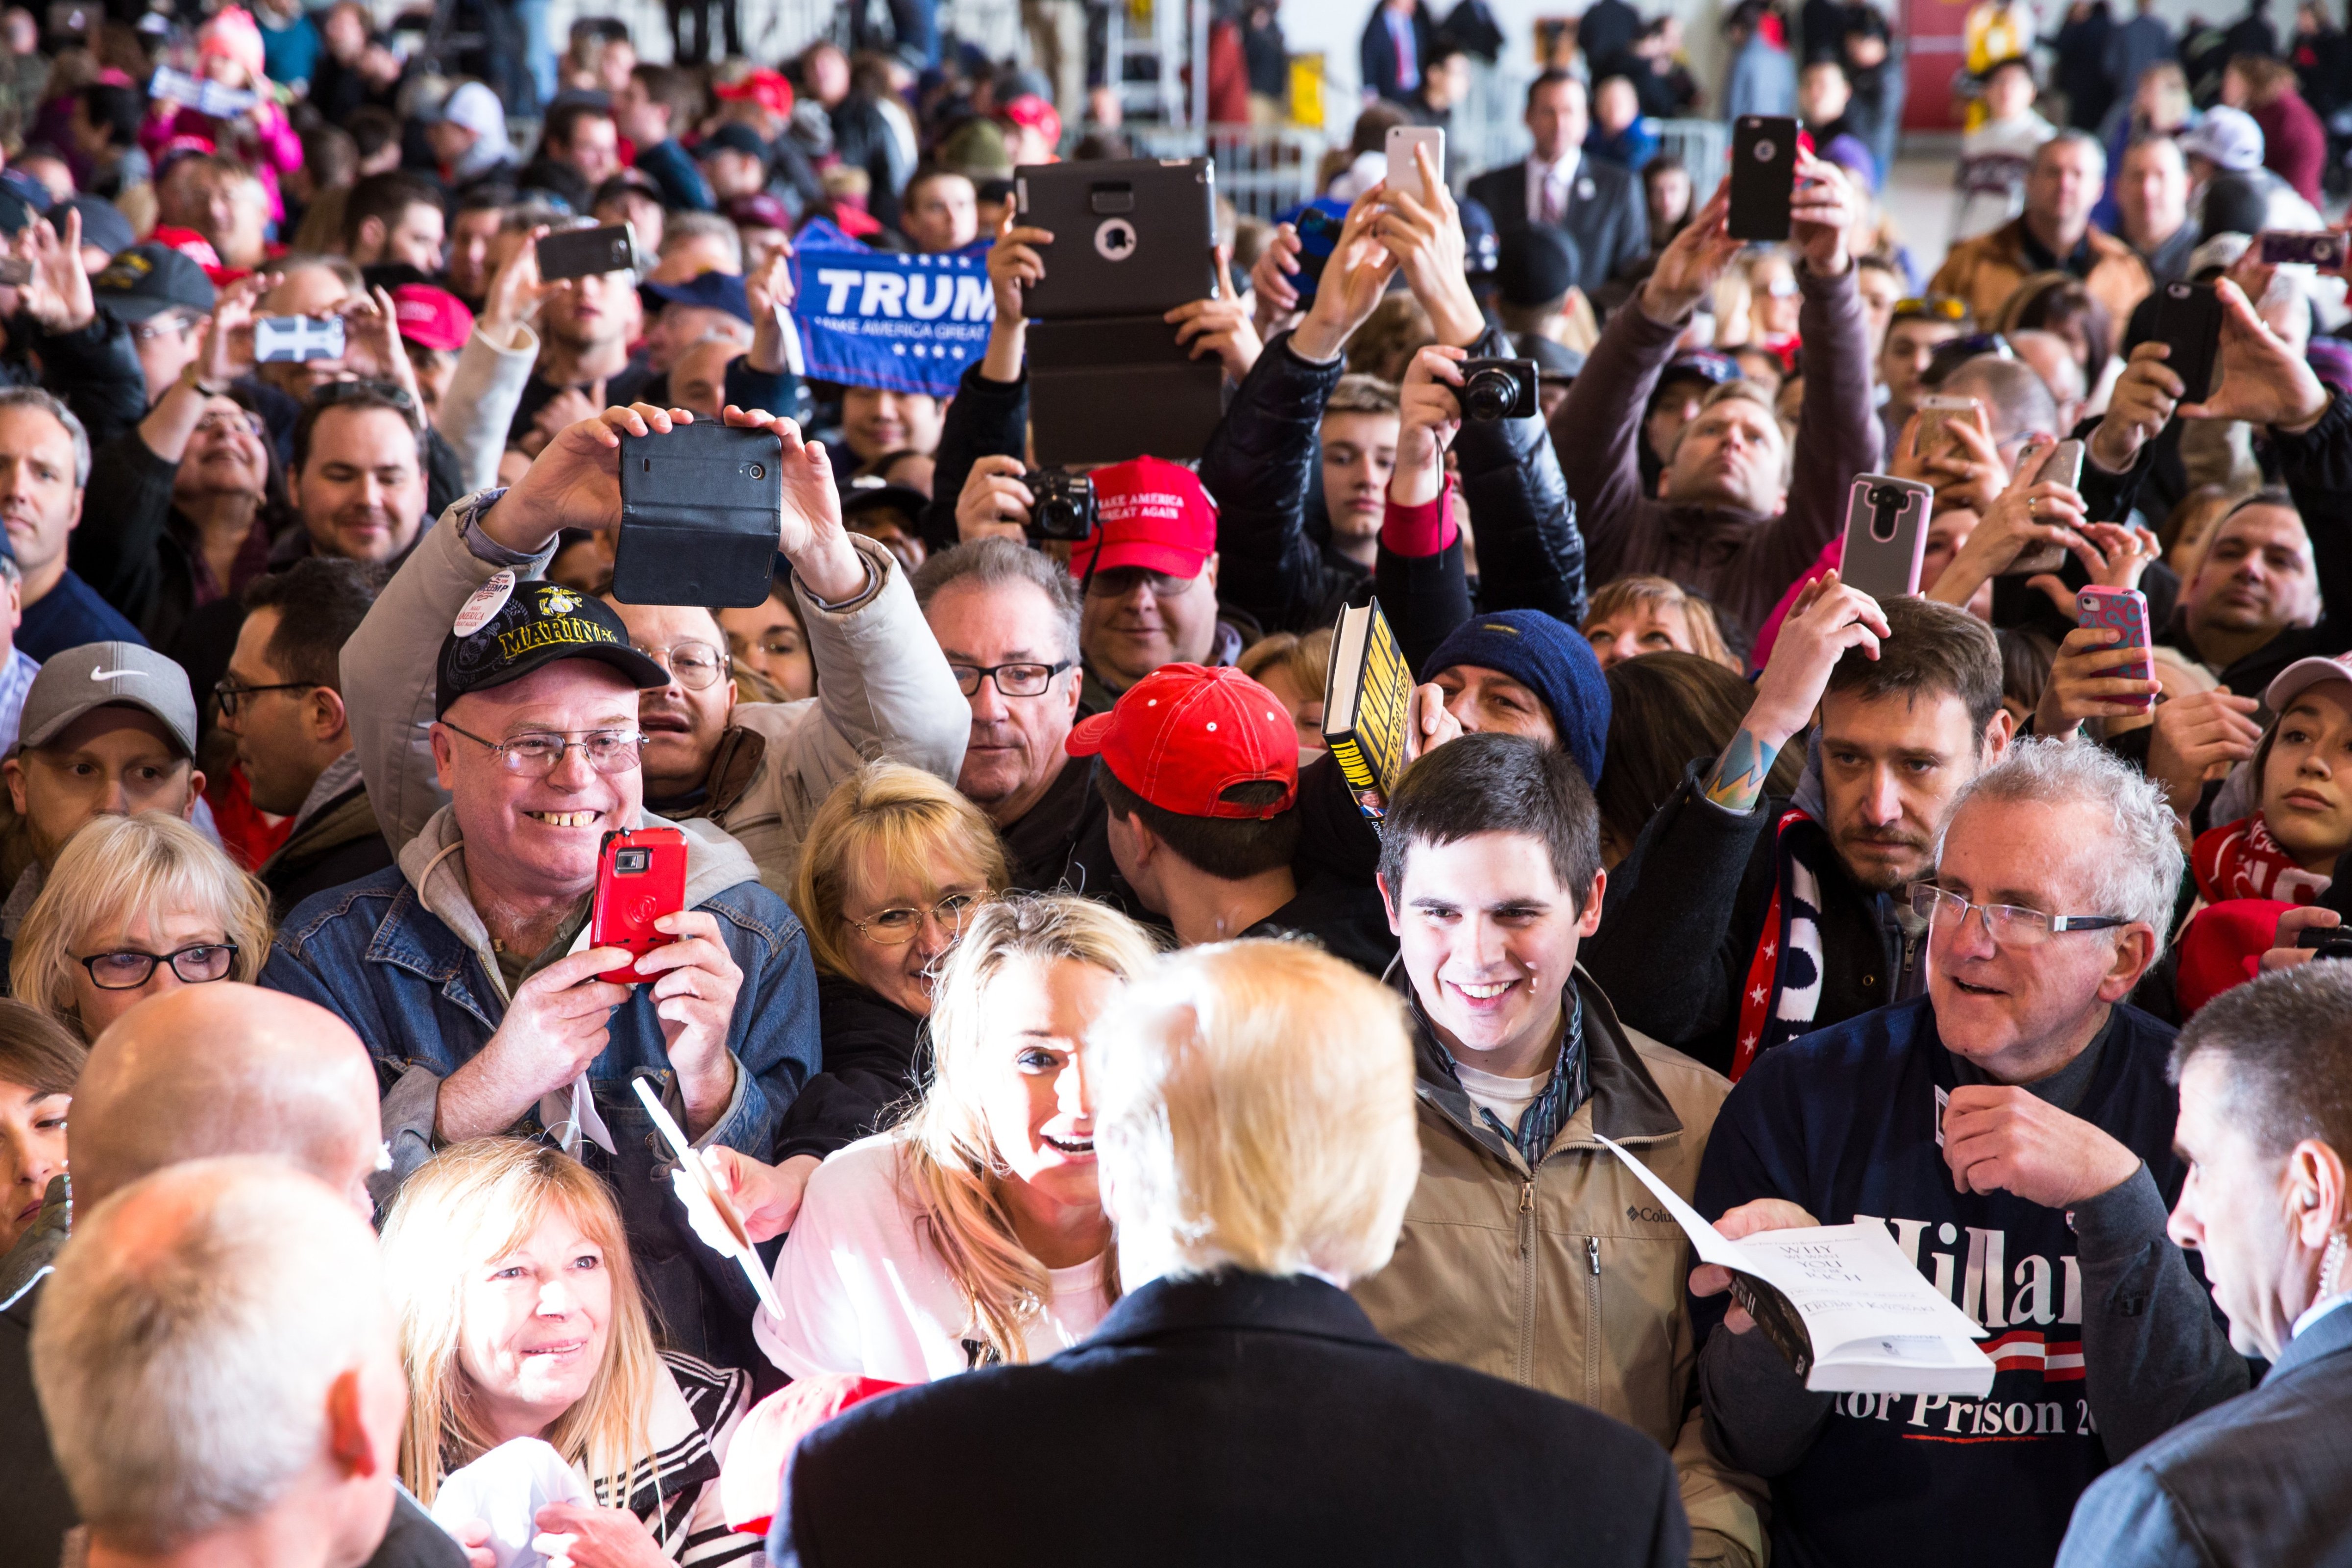 Republican presidential candidate Donald Trump greets the crowd at a rally for his campaign in Rochester, New York on April 10, 2016. (Brett Carlsen—Getty Images)